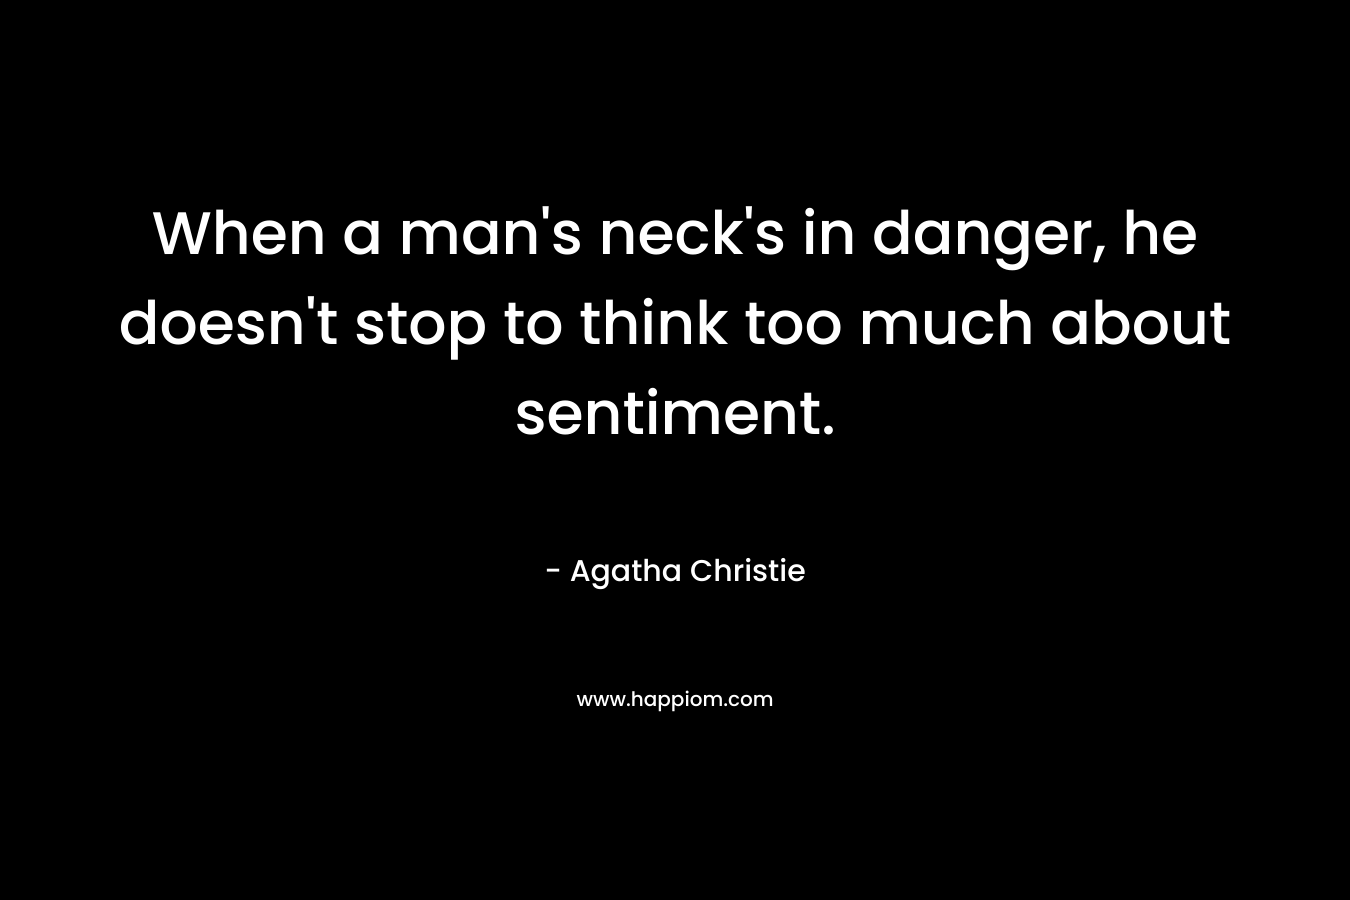 When a man’s neck’s in danger, he doesn’t stop to think too much about sentiment. – Agatha Christie